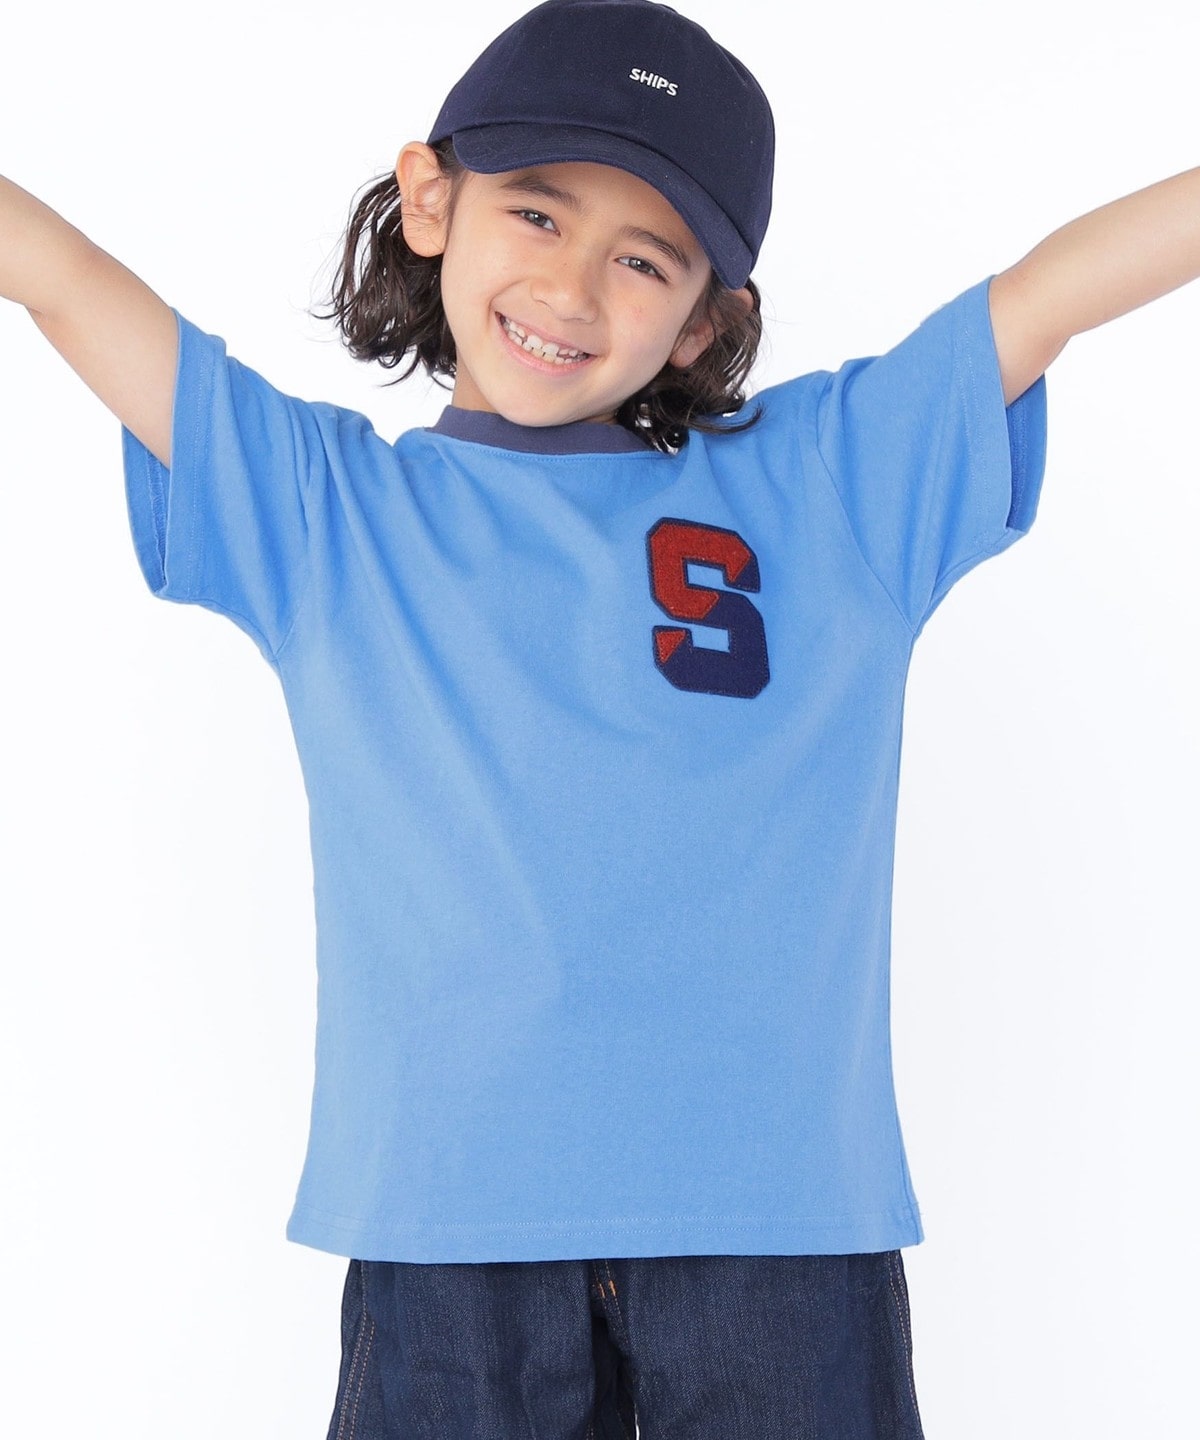 【SHIPS KIDS別注】RUSSELL ATHLETIC:100〜160cm / ロゴ TEE ライトブルー